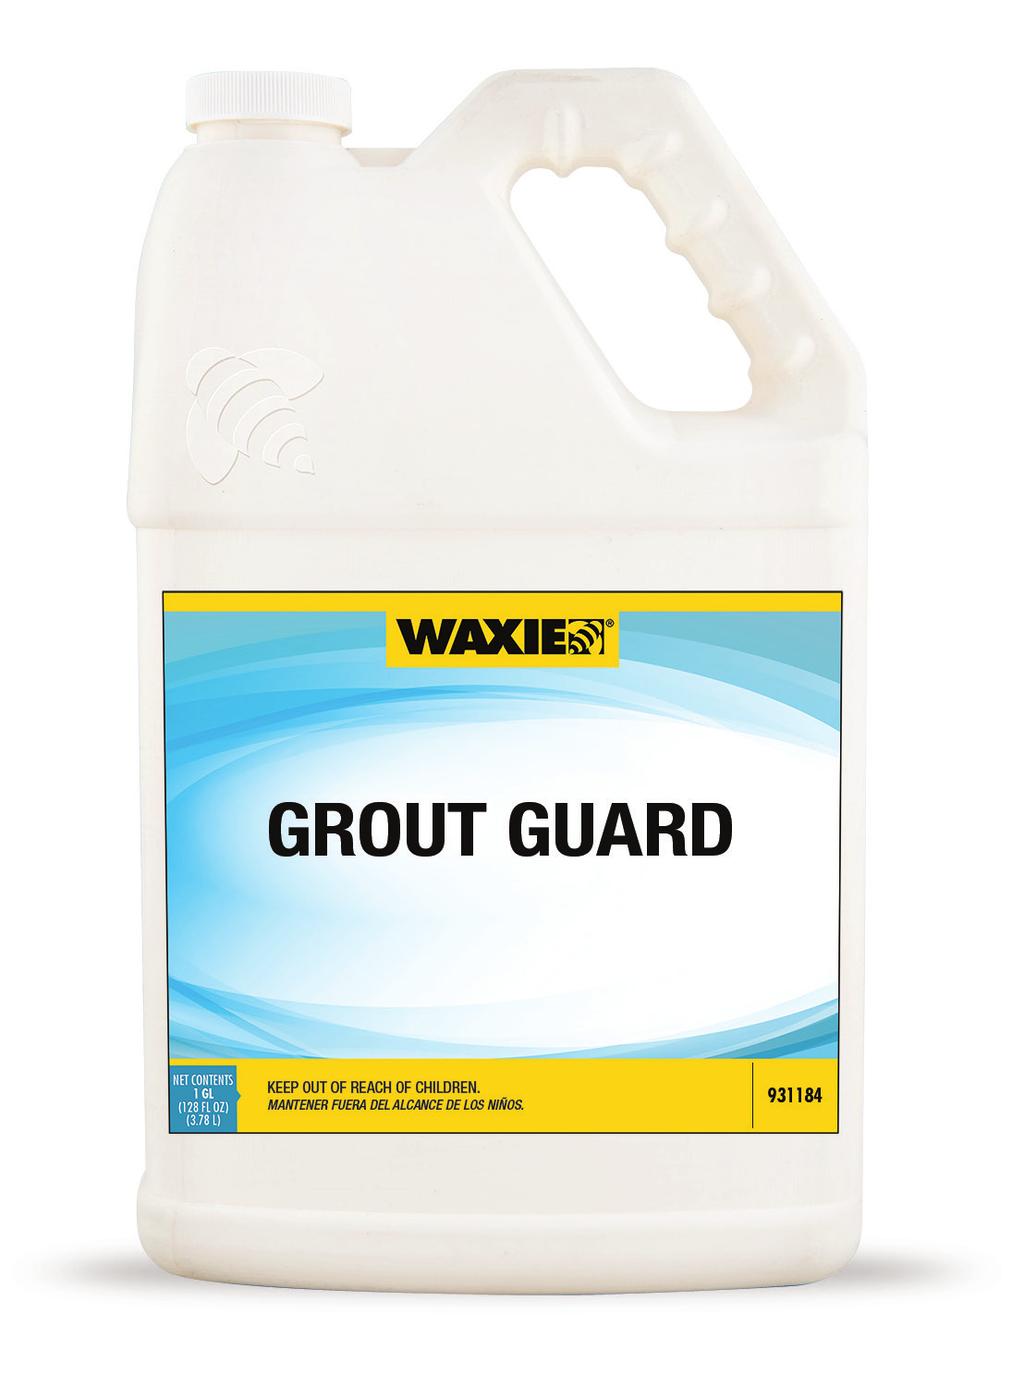 GROUT GUARD PERMANENT PENETRATING GROUT SEALER FOR TILE SURFACES A tough, permanent, high solid, water-borne grout sealer that penetrates deep into grout and repels soil and germs while improving